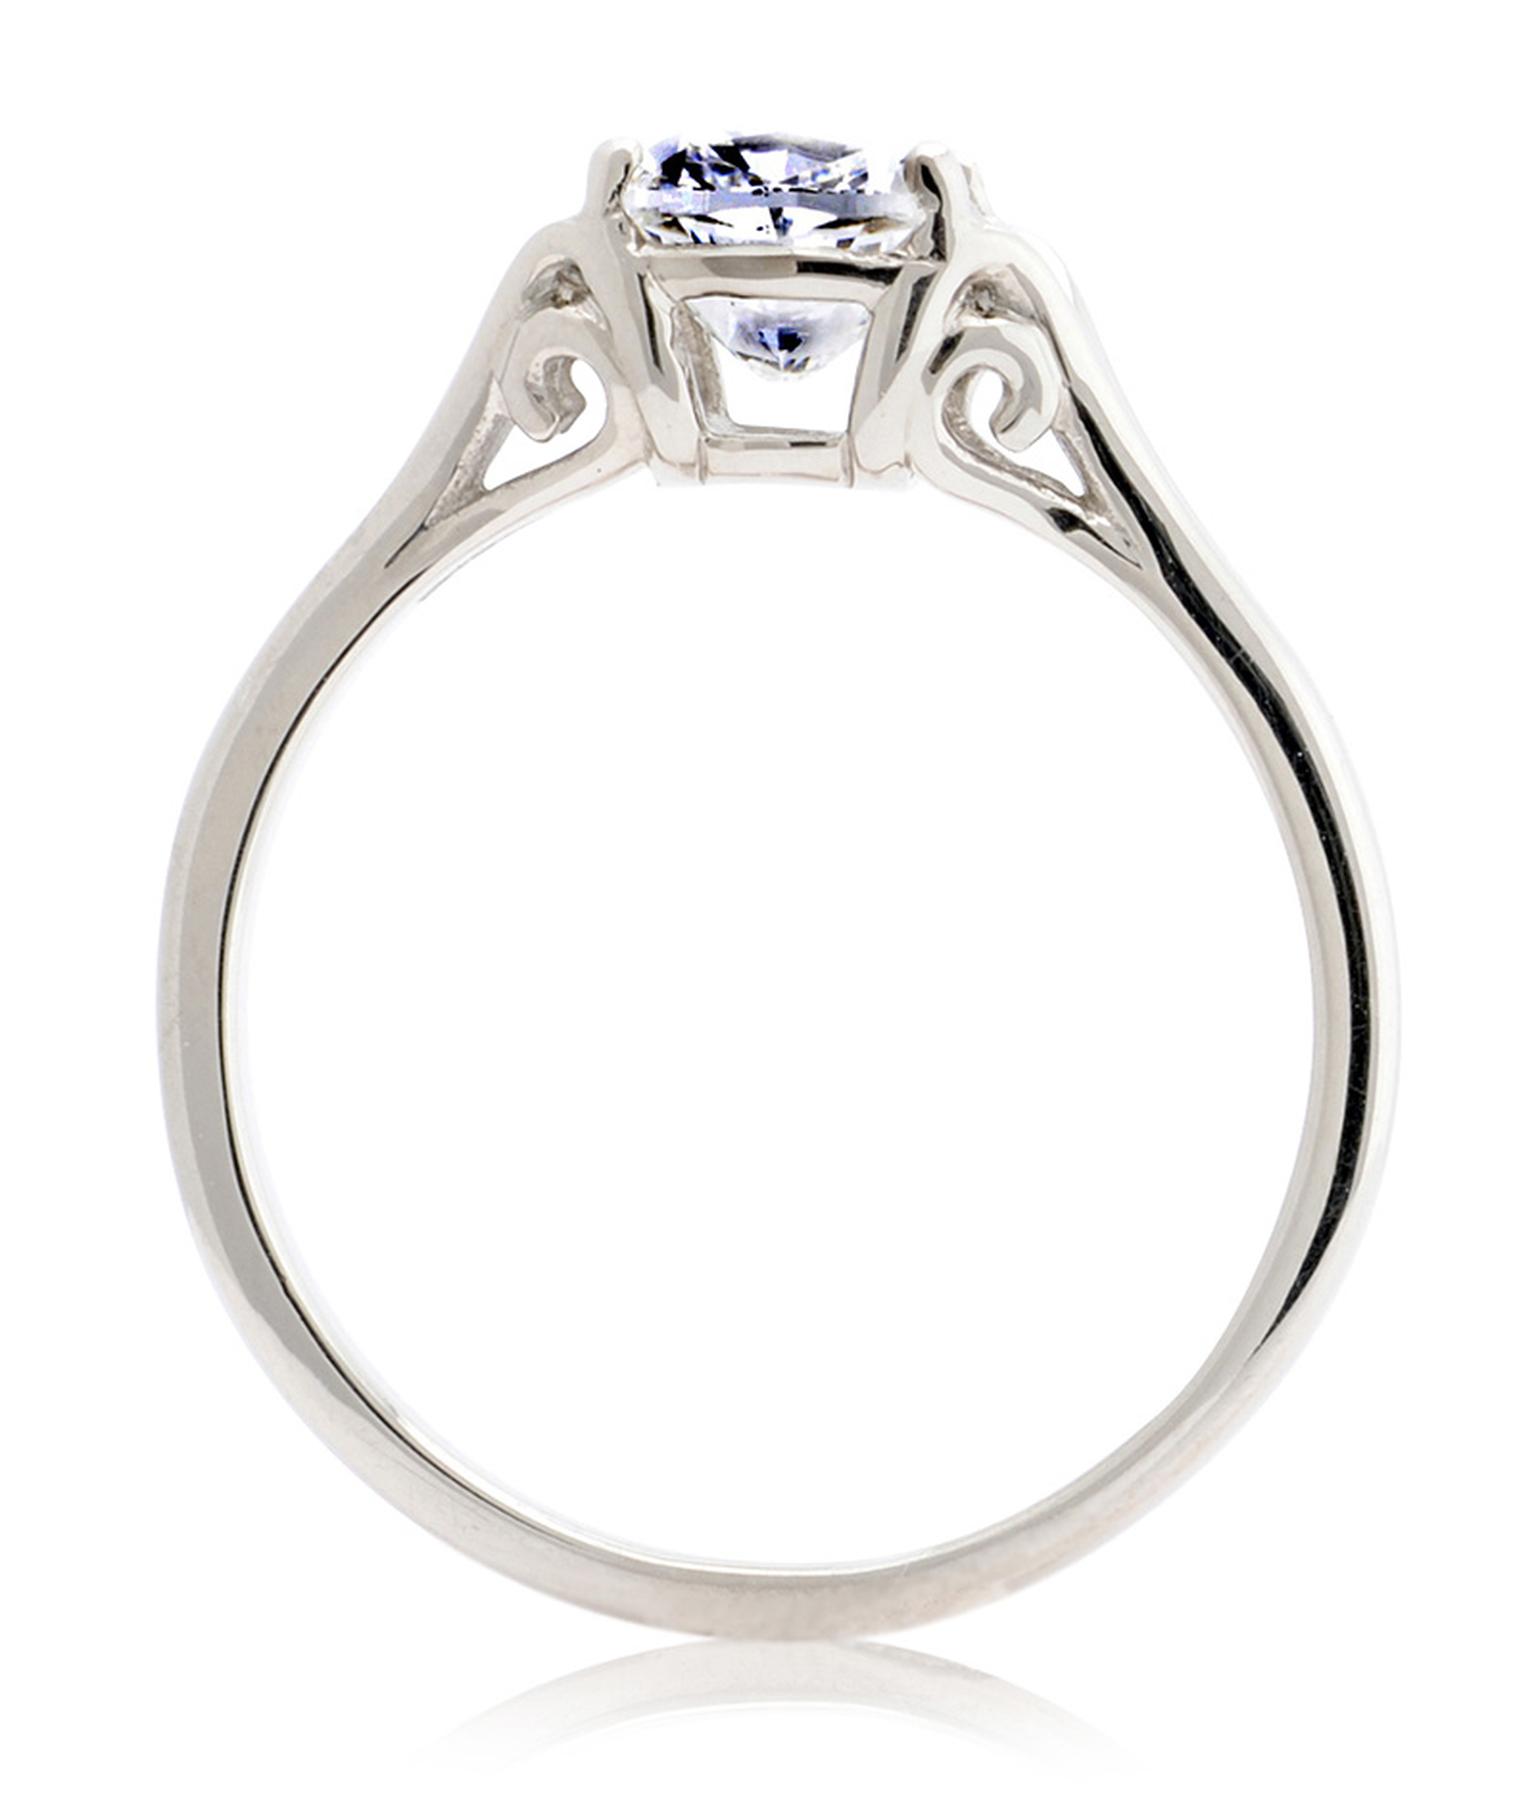 CRED Vintage cushion-cut diamond ring (from £6,450), available in Fairtrade white or yellow gold.